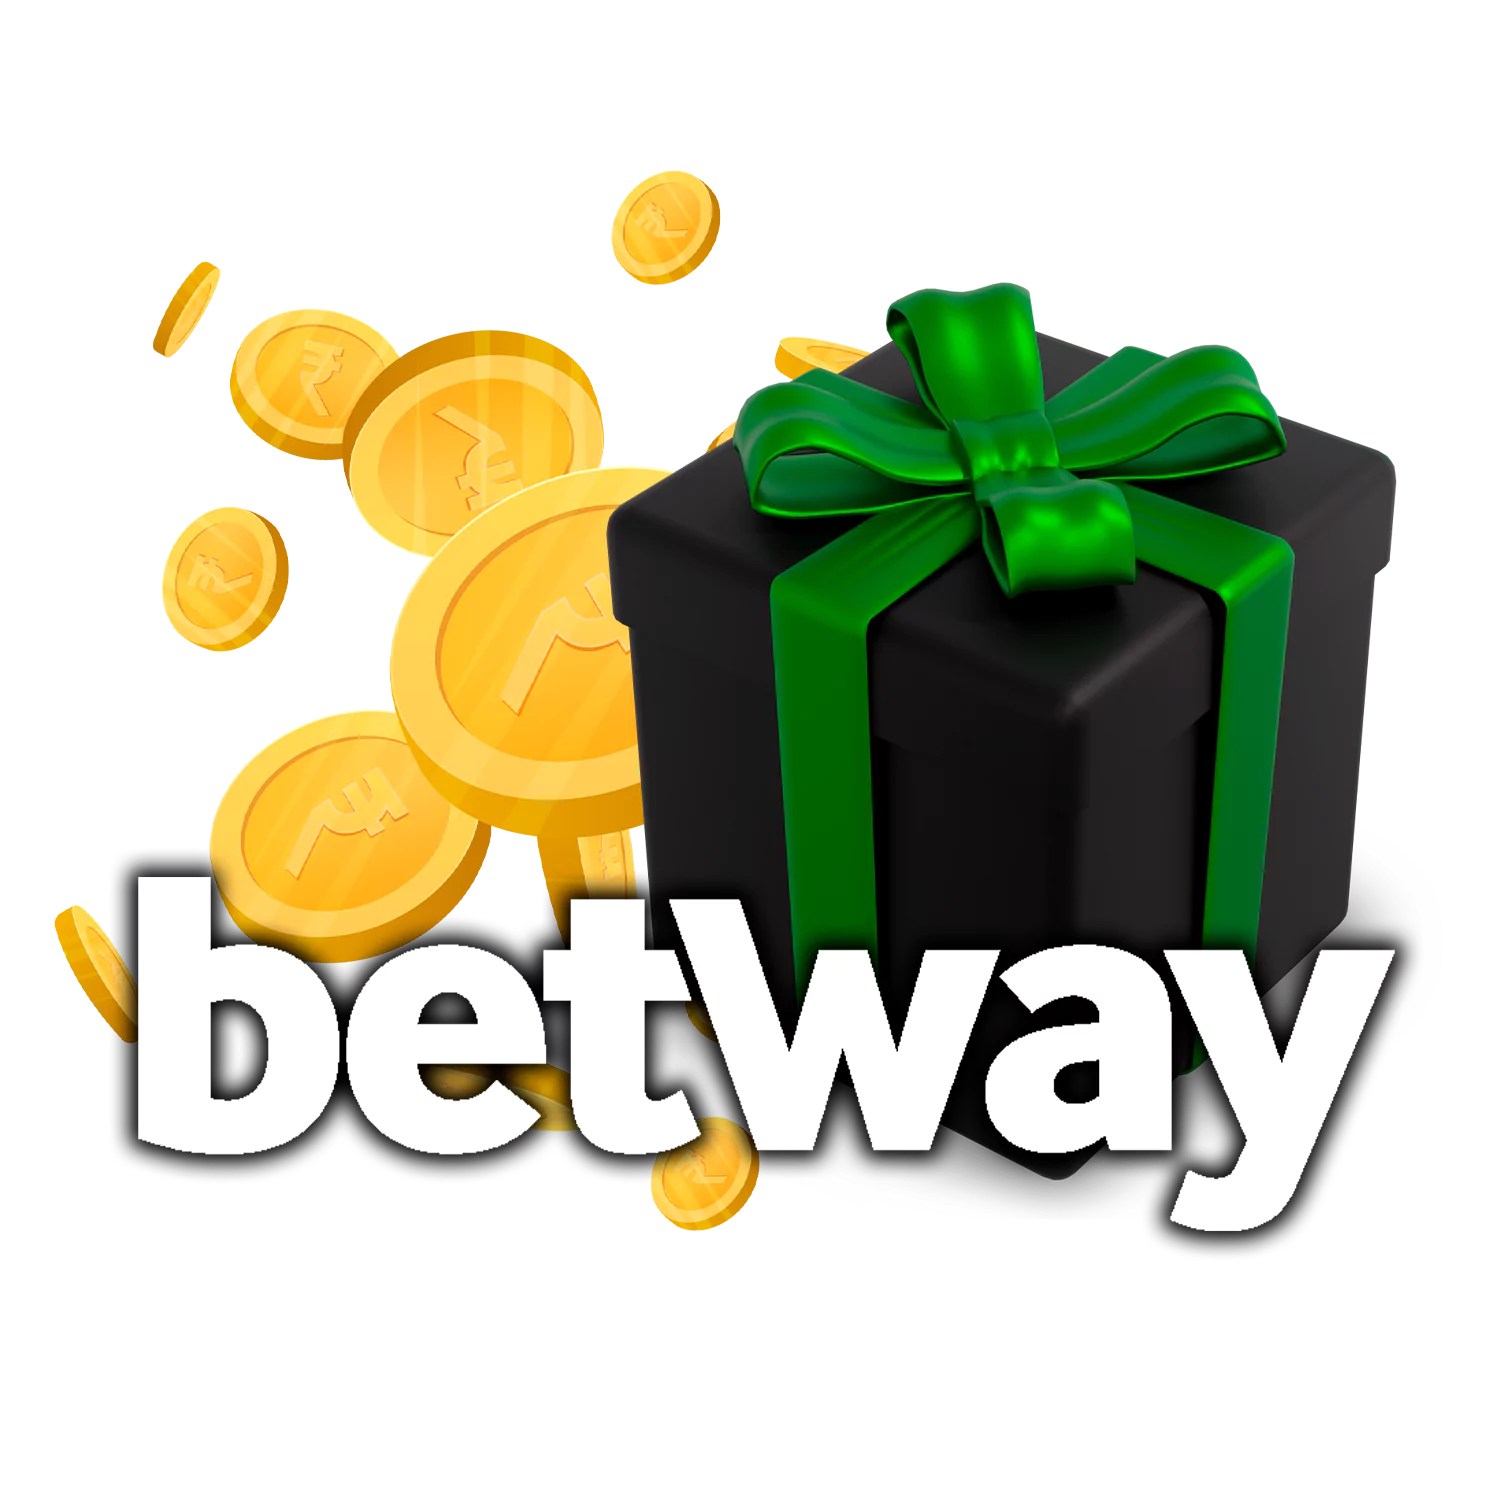 Learn what bonuses suggest Betway to its users and to get them.